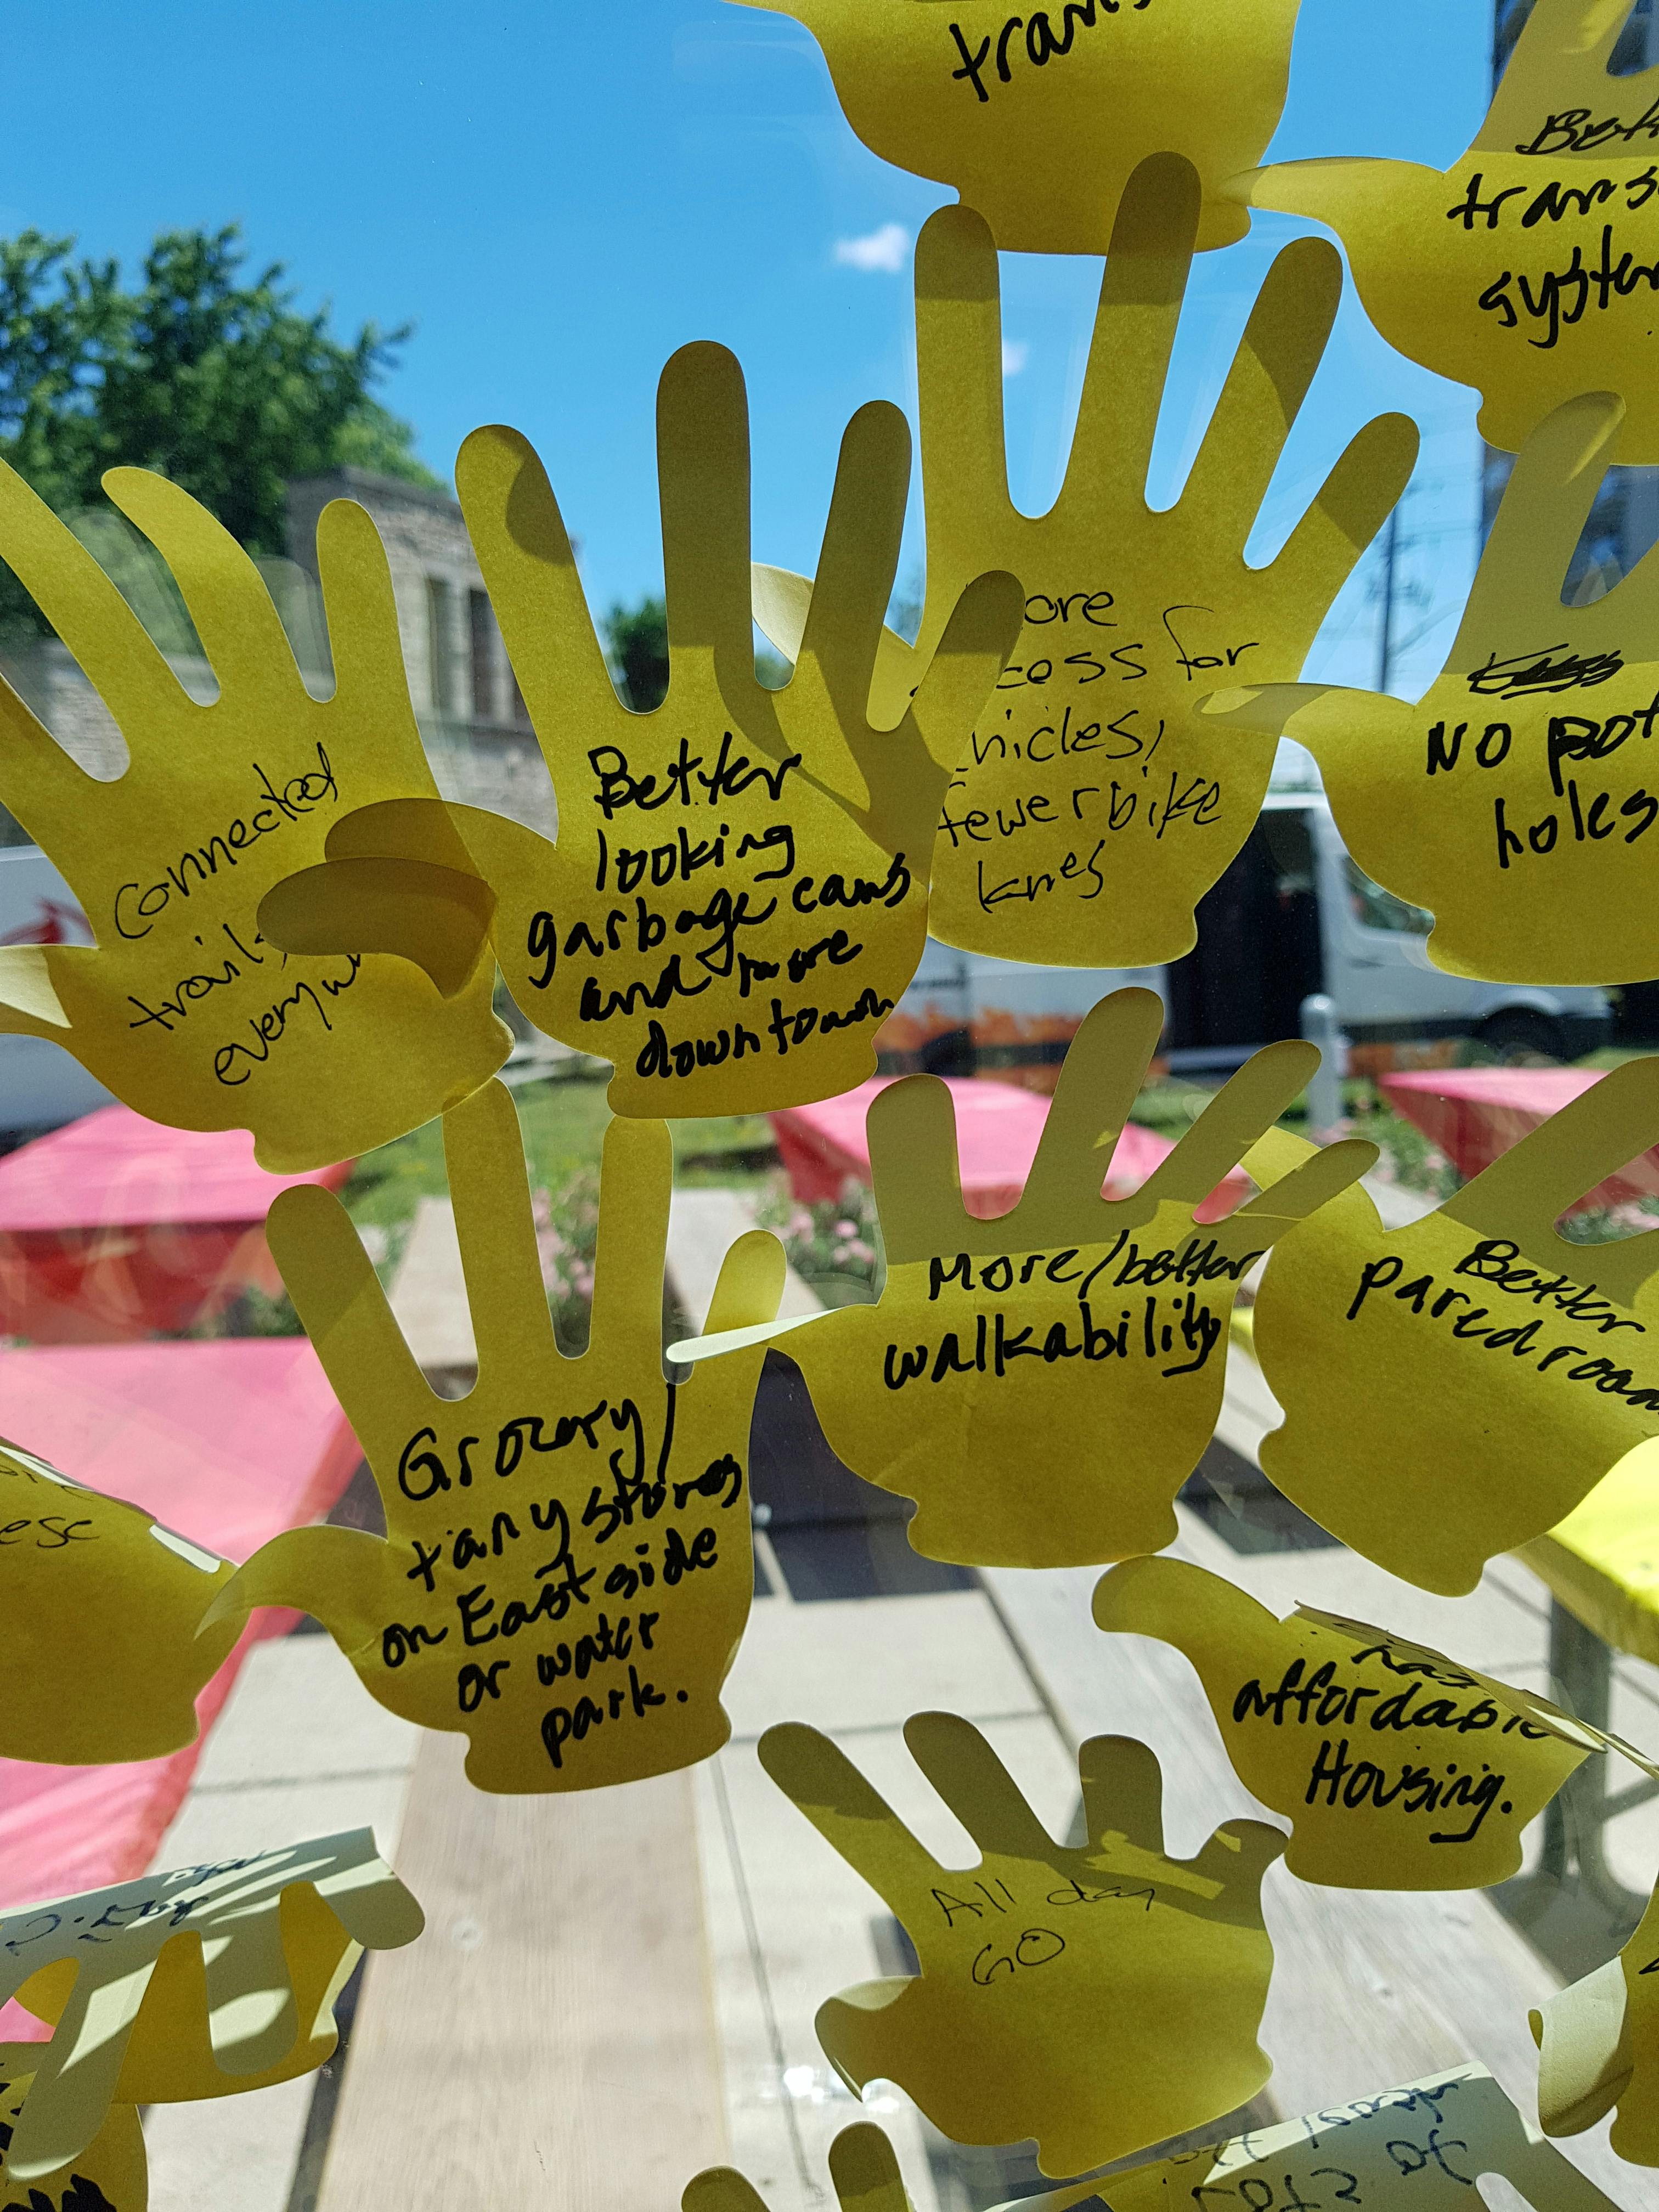 City staff BBQ - what's your one wish for Guelph?